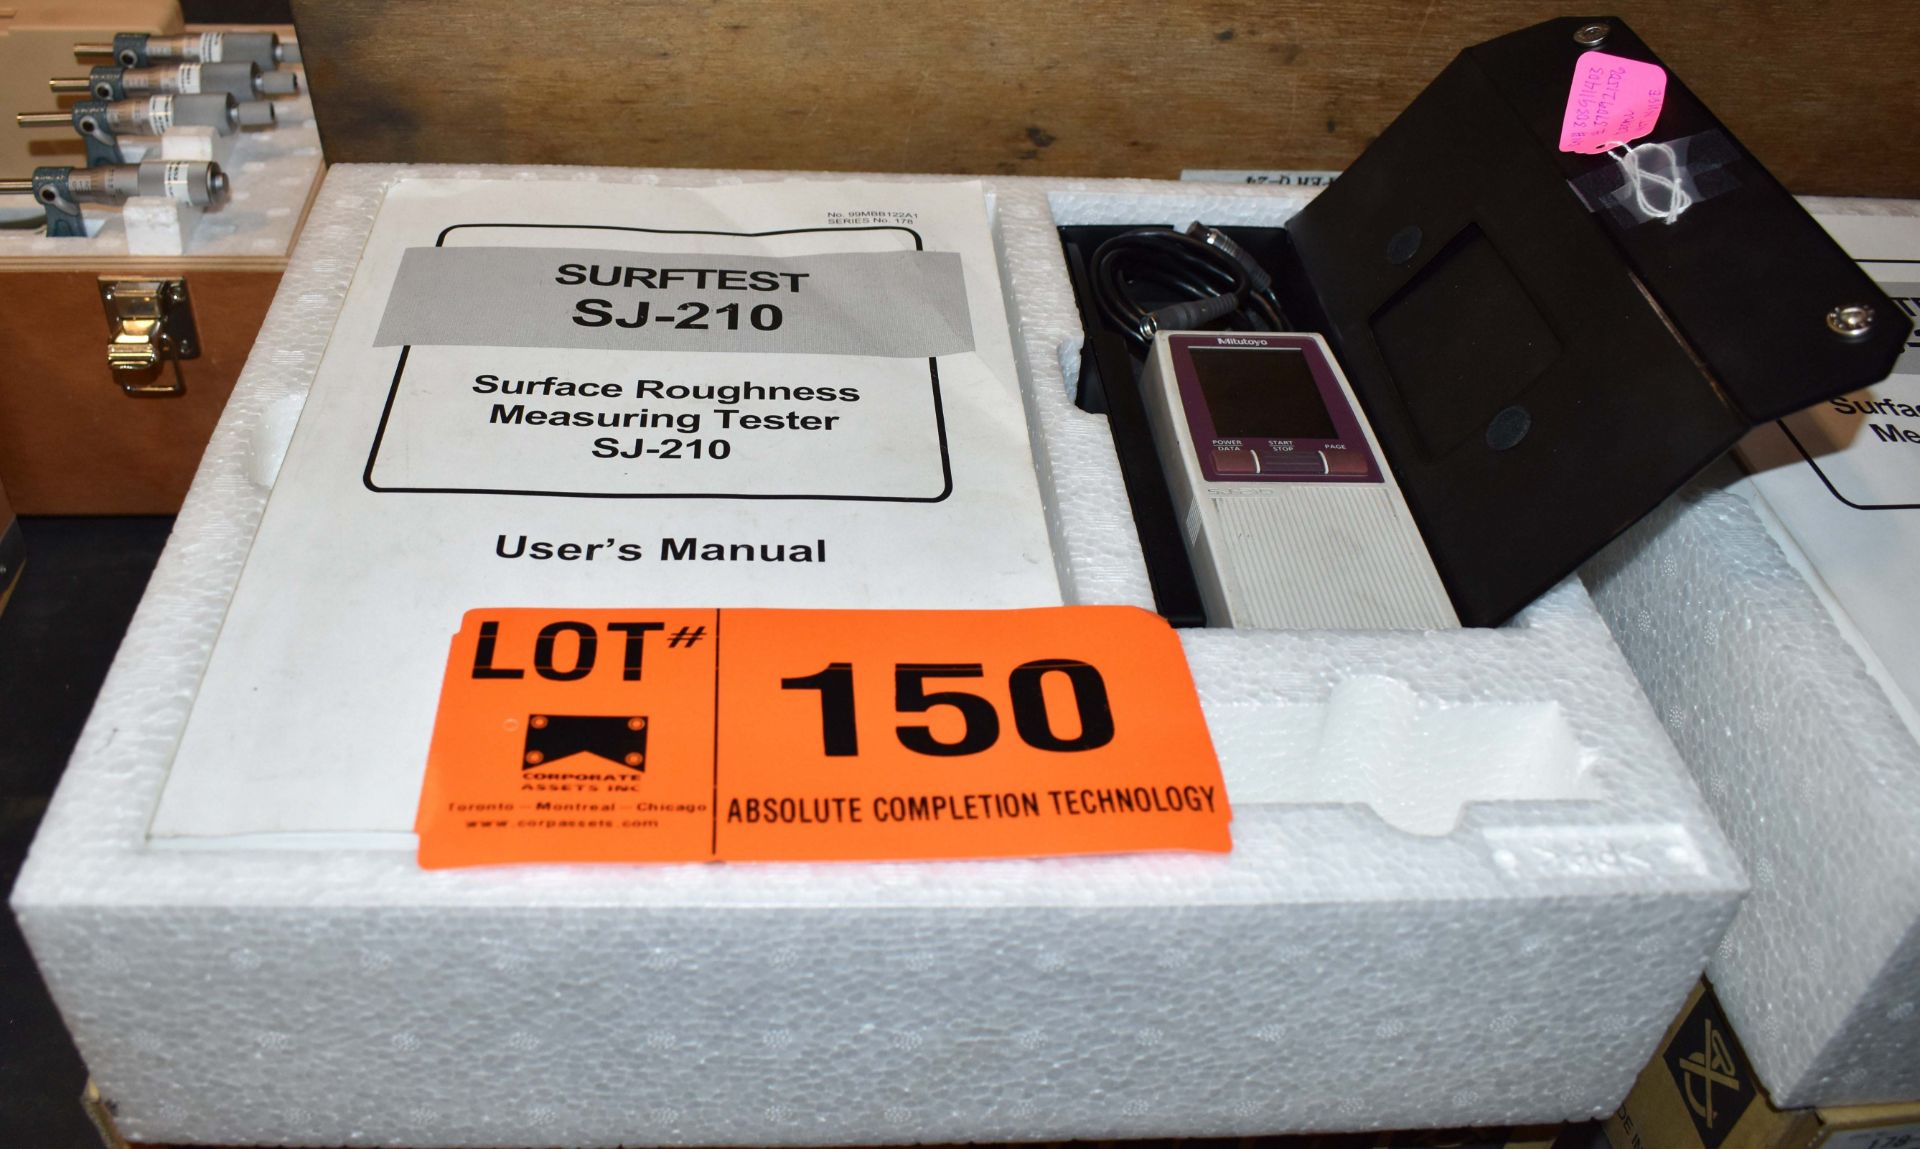 MITUTOYO SURFTEST SJ-210 DIGITAL SURFACE ROUGHNESS MEASURING TESTER [RIGGING FEES FOR LOT #150 - $10